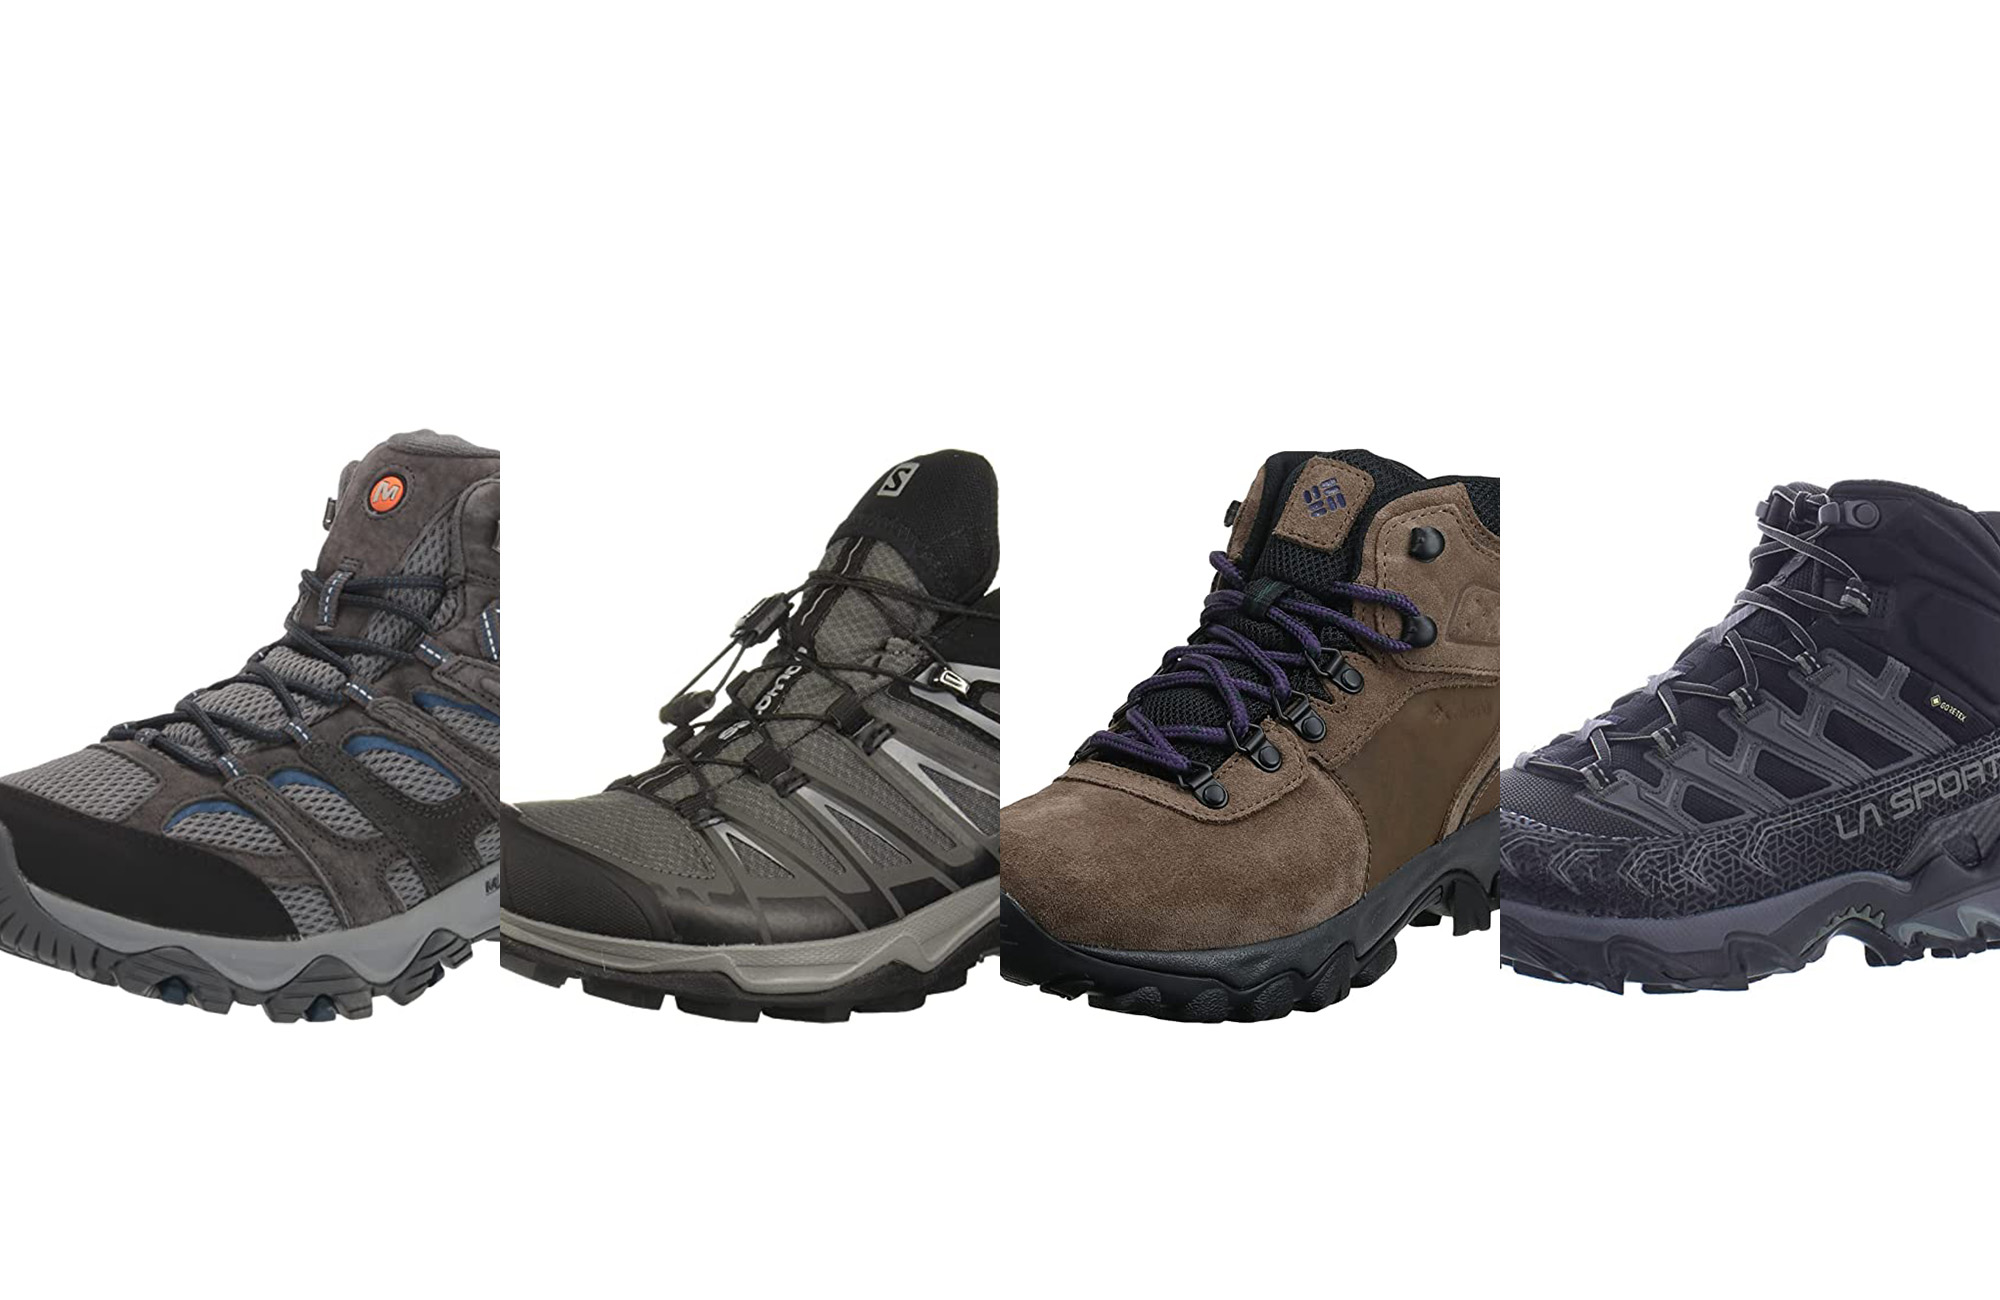 A lineup of the best hiking boots against a white background